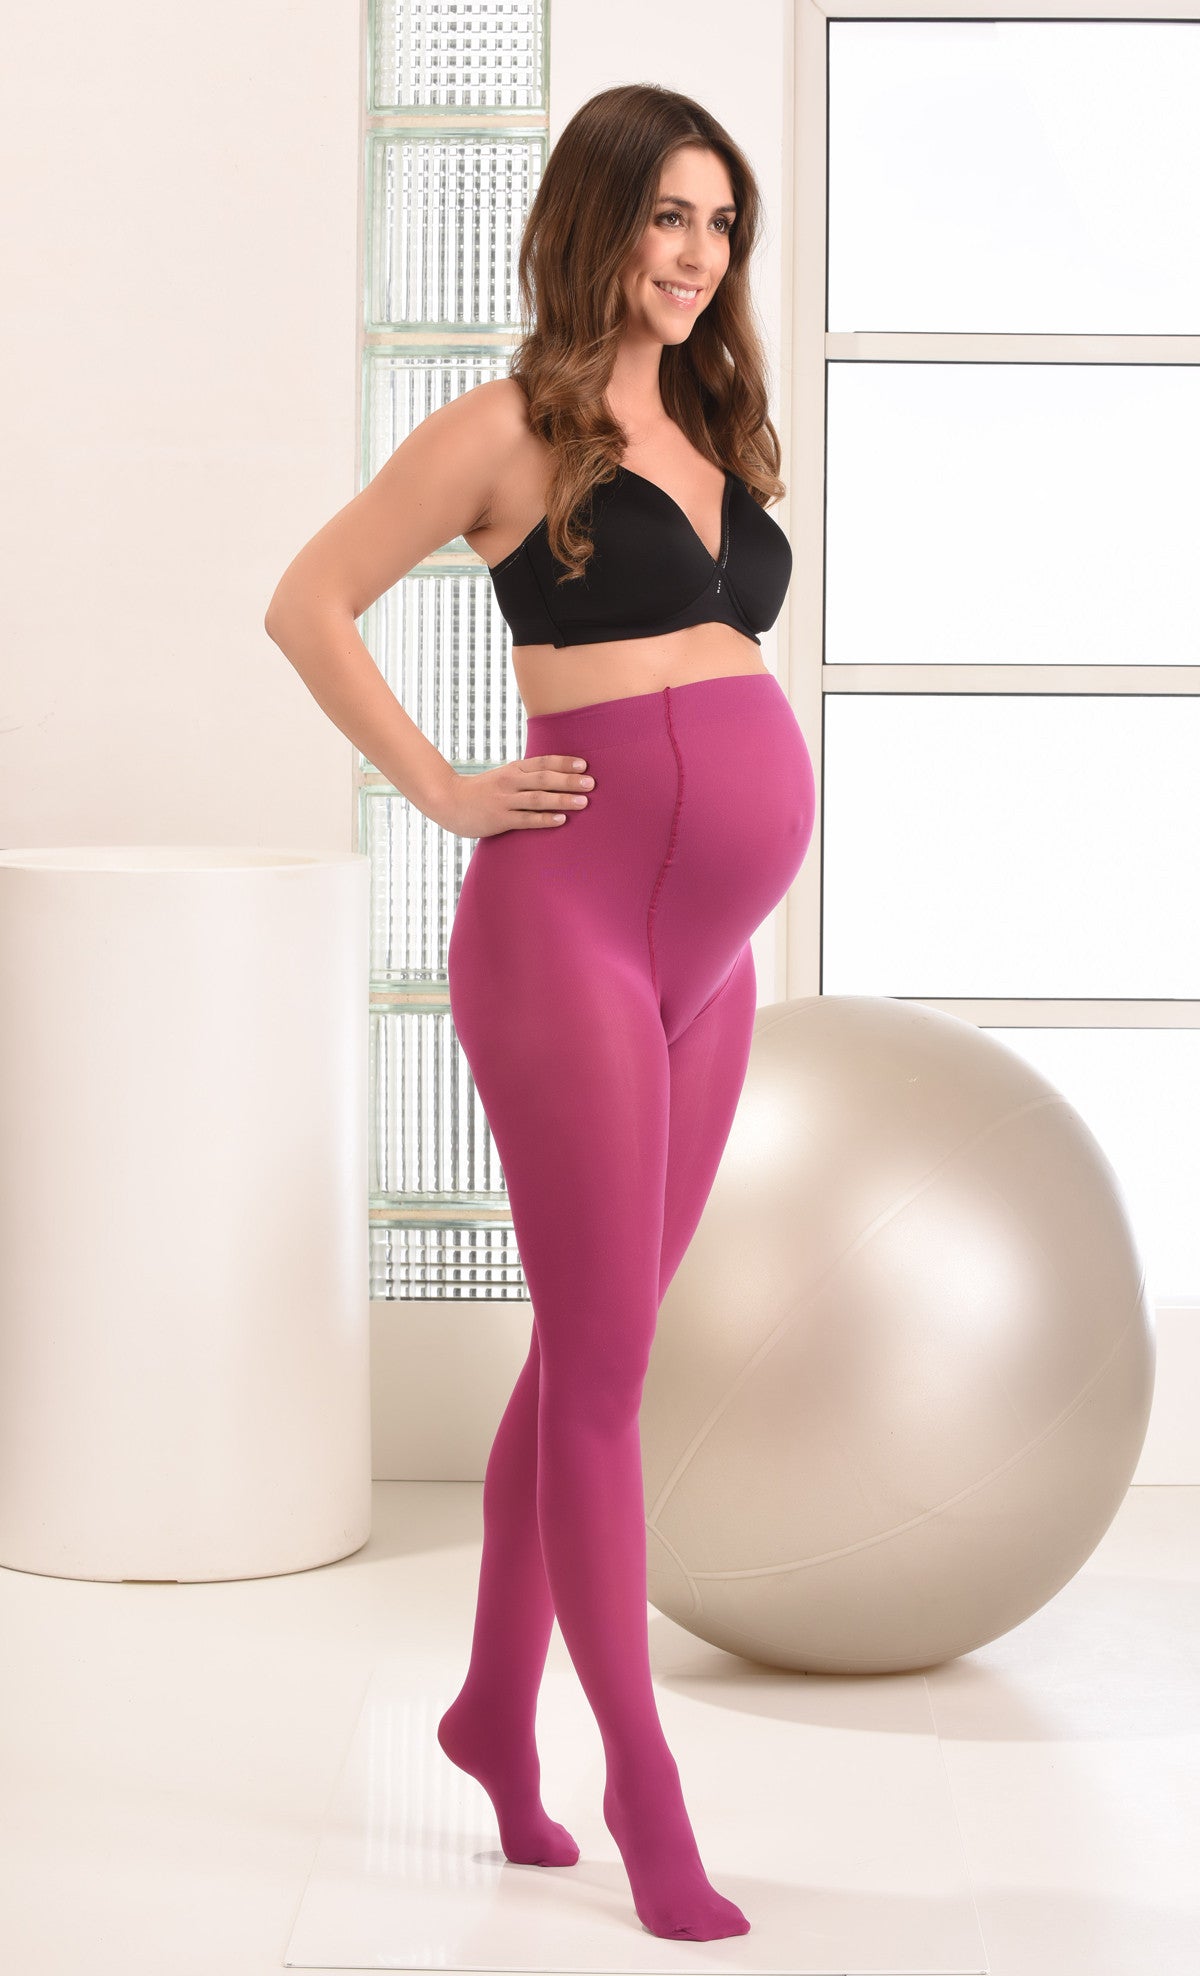 Duo Pack Comfortable Opaque Maternity Tights 60den Red